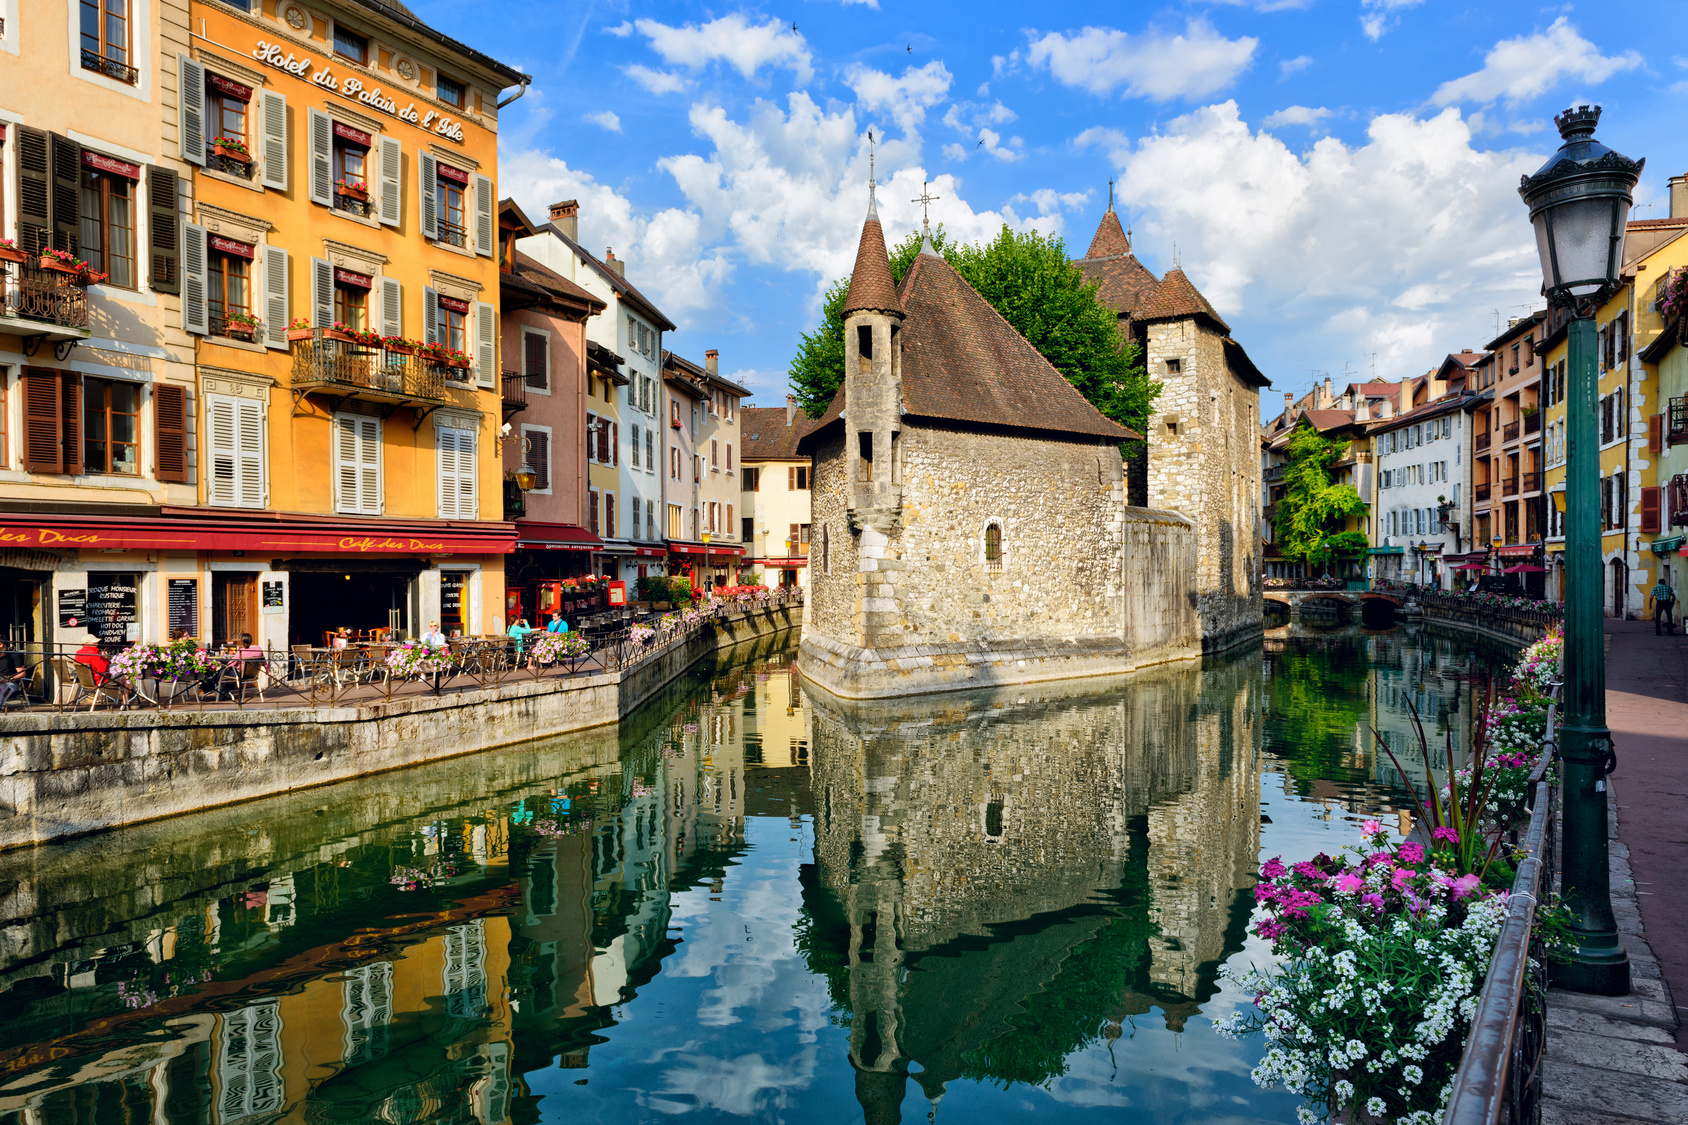 annecy - photo #2